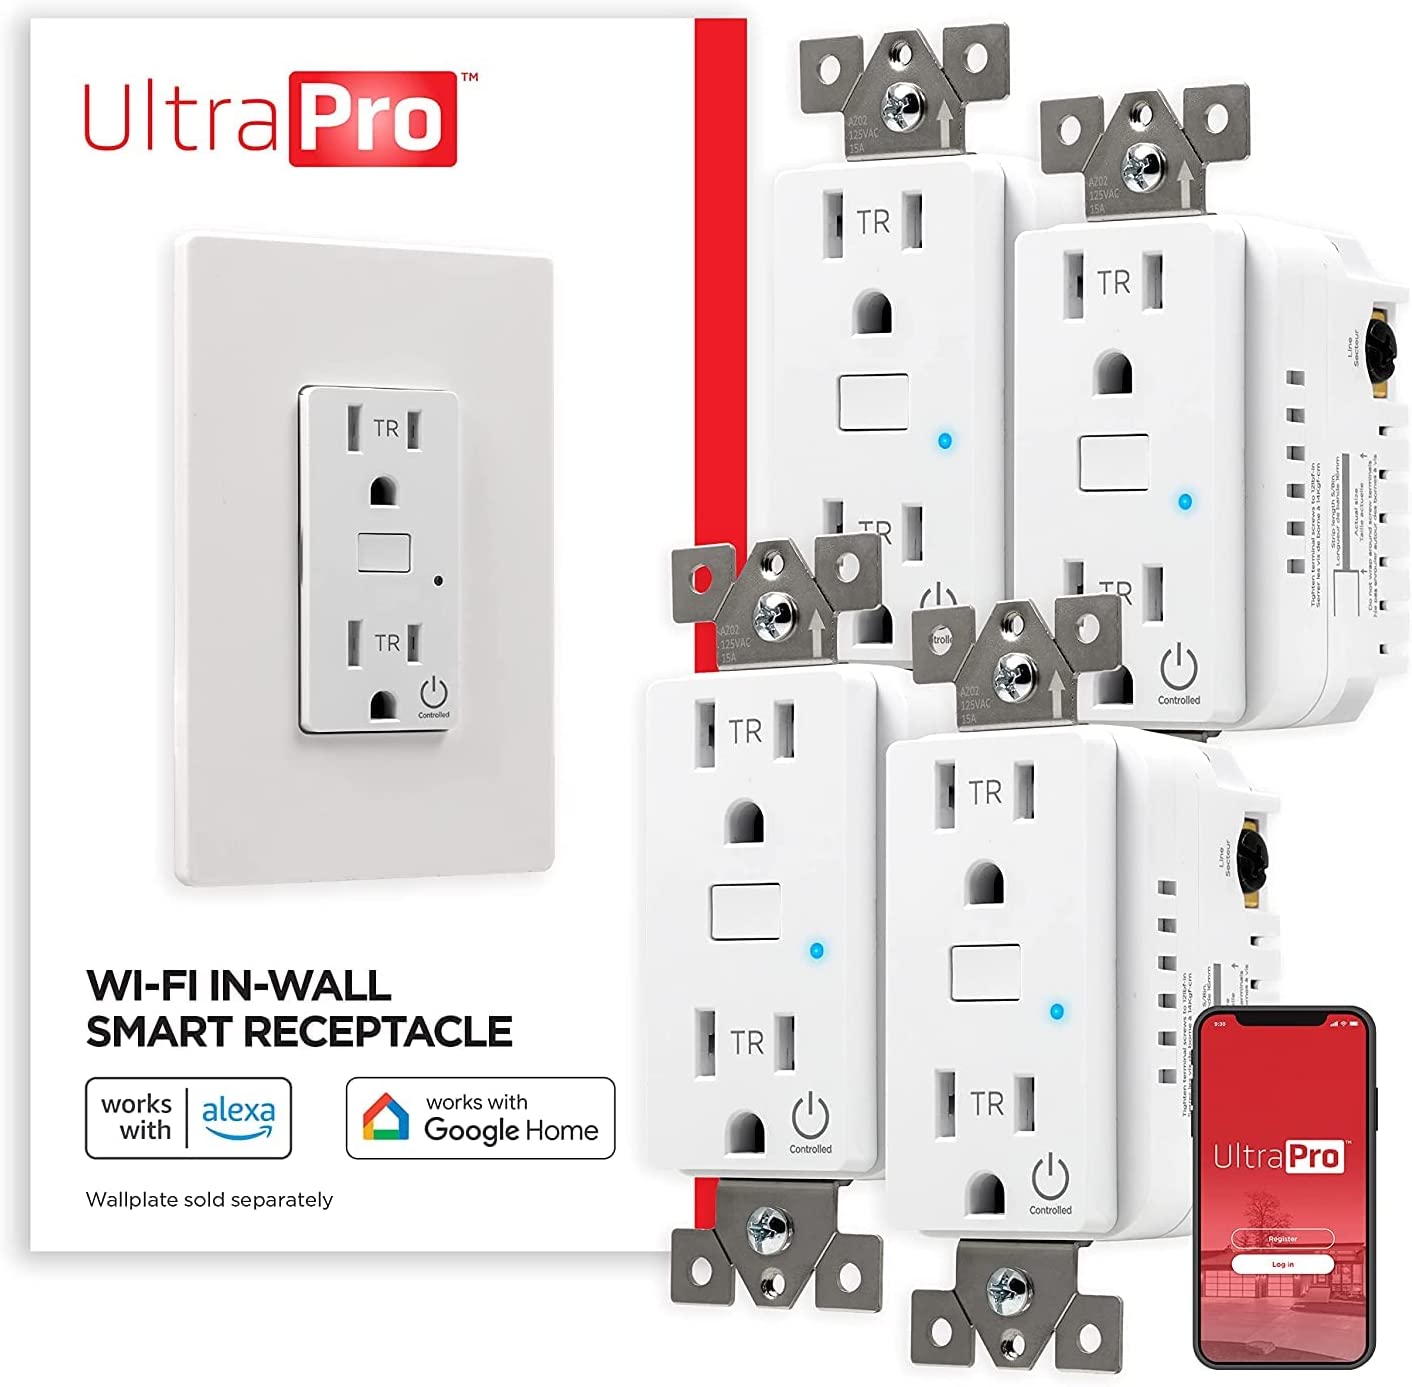 UltraPro Smart Switch, 2.4GHz Wi-Fi Smart Light Switch, QuickFit & SimpleWire, 3 Way Switch, Works with Alexa, Google Assistant, No Hub Needed, UL Certified, Needs Neutral Wire, White, 1 Pack, 51424